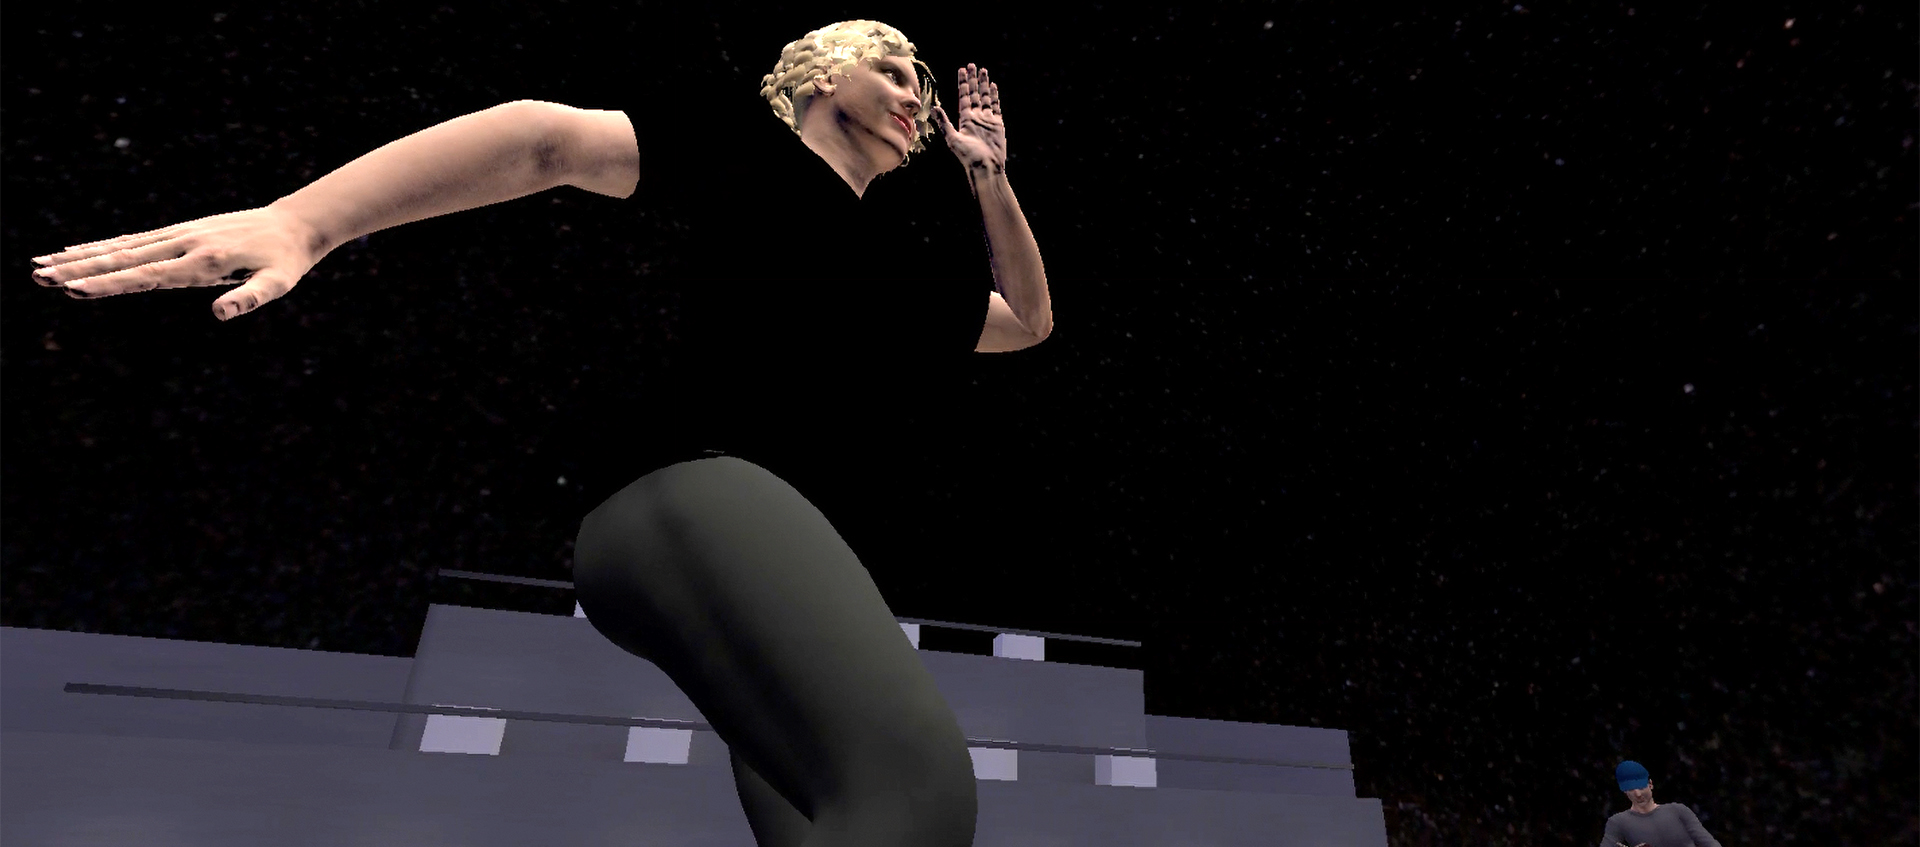 Low-angle view of a blonde, dancing avatar wearing a black outfit on a virtual stage. An avatar of a man sitting and reading a book is in the background.